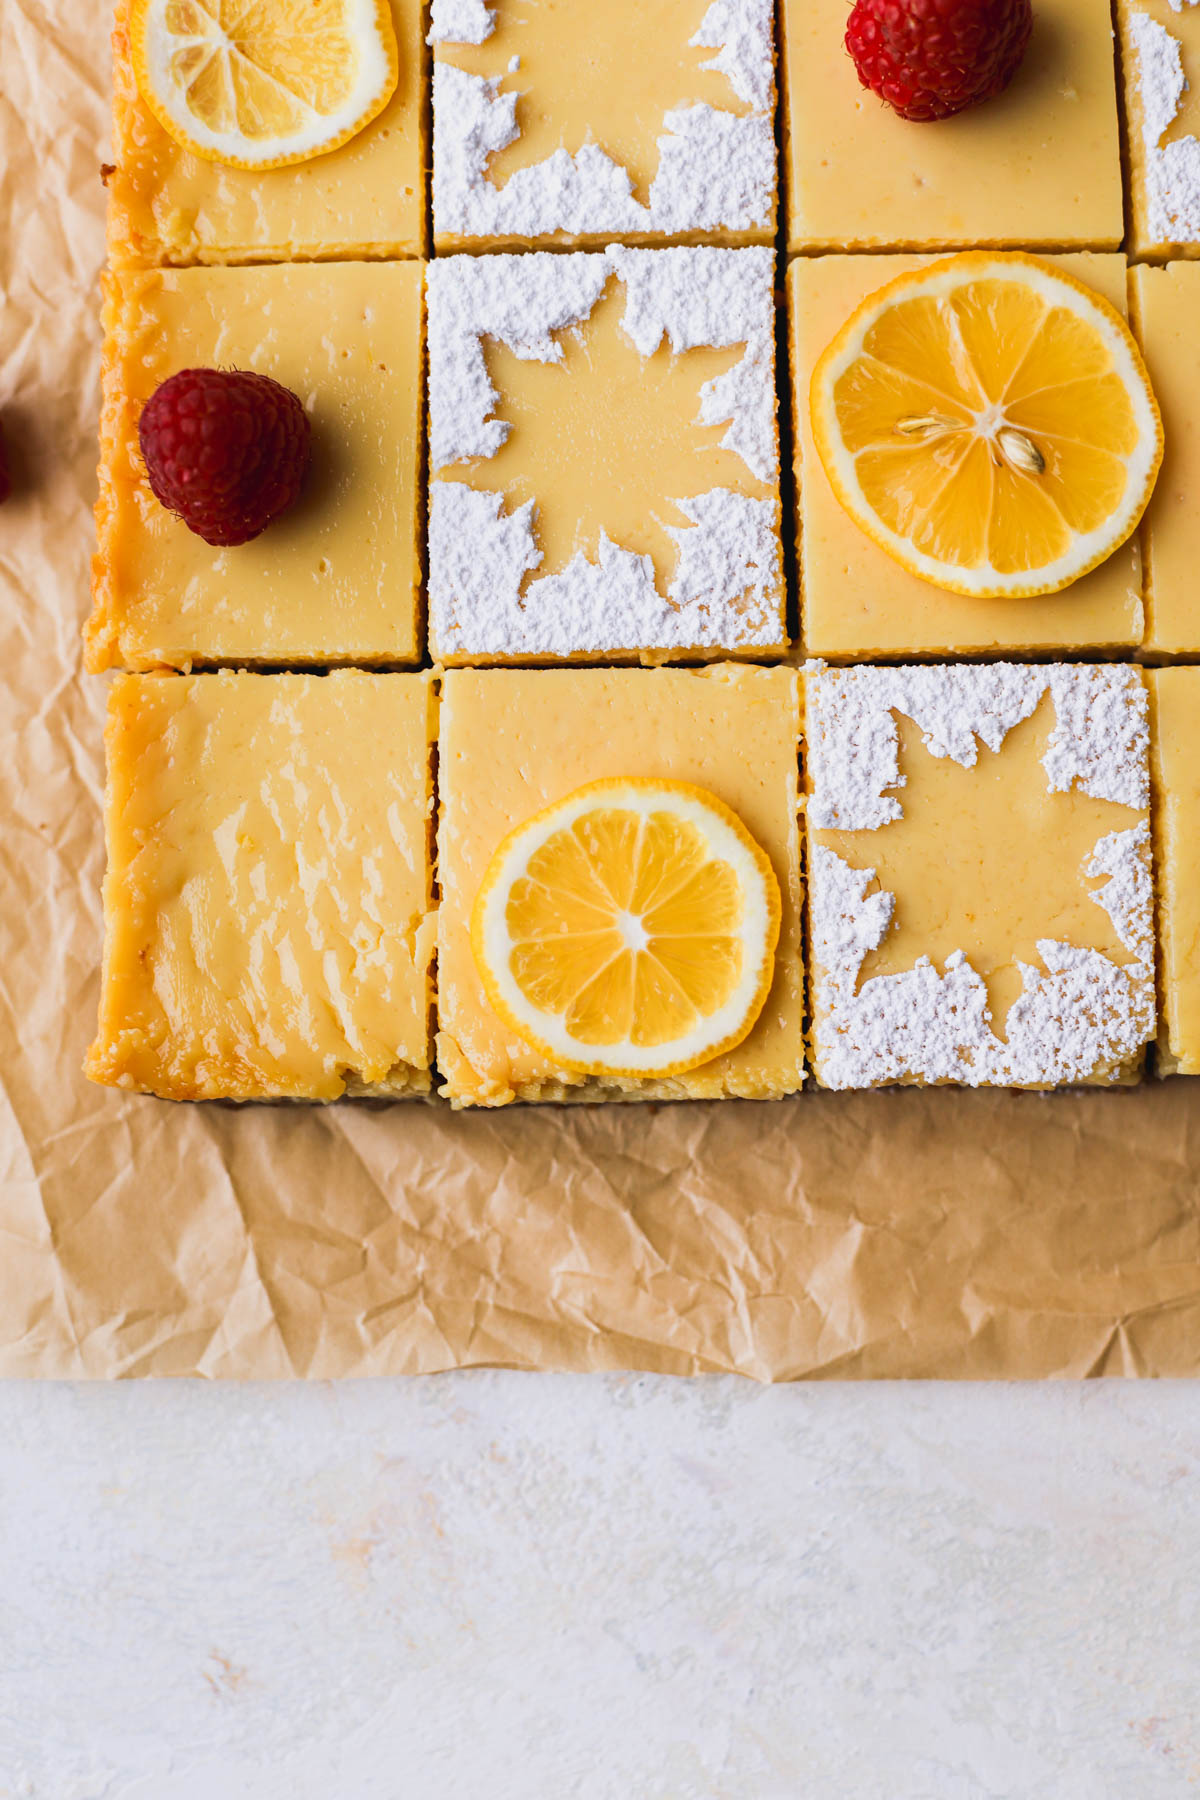 These lemon bars with graham cracker crust are made with sweet Meyer lemons and a brown butter crust.